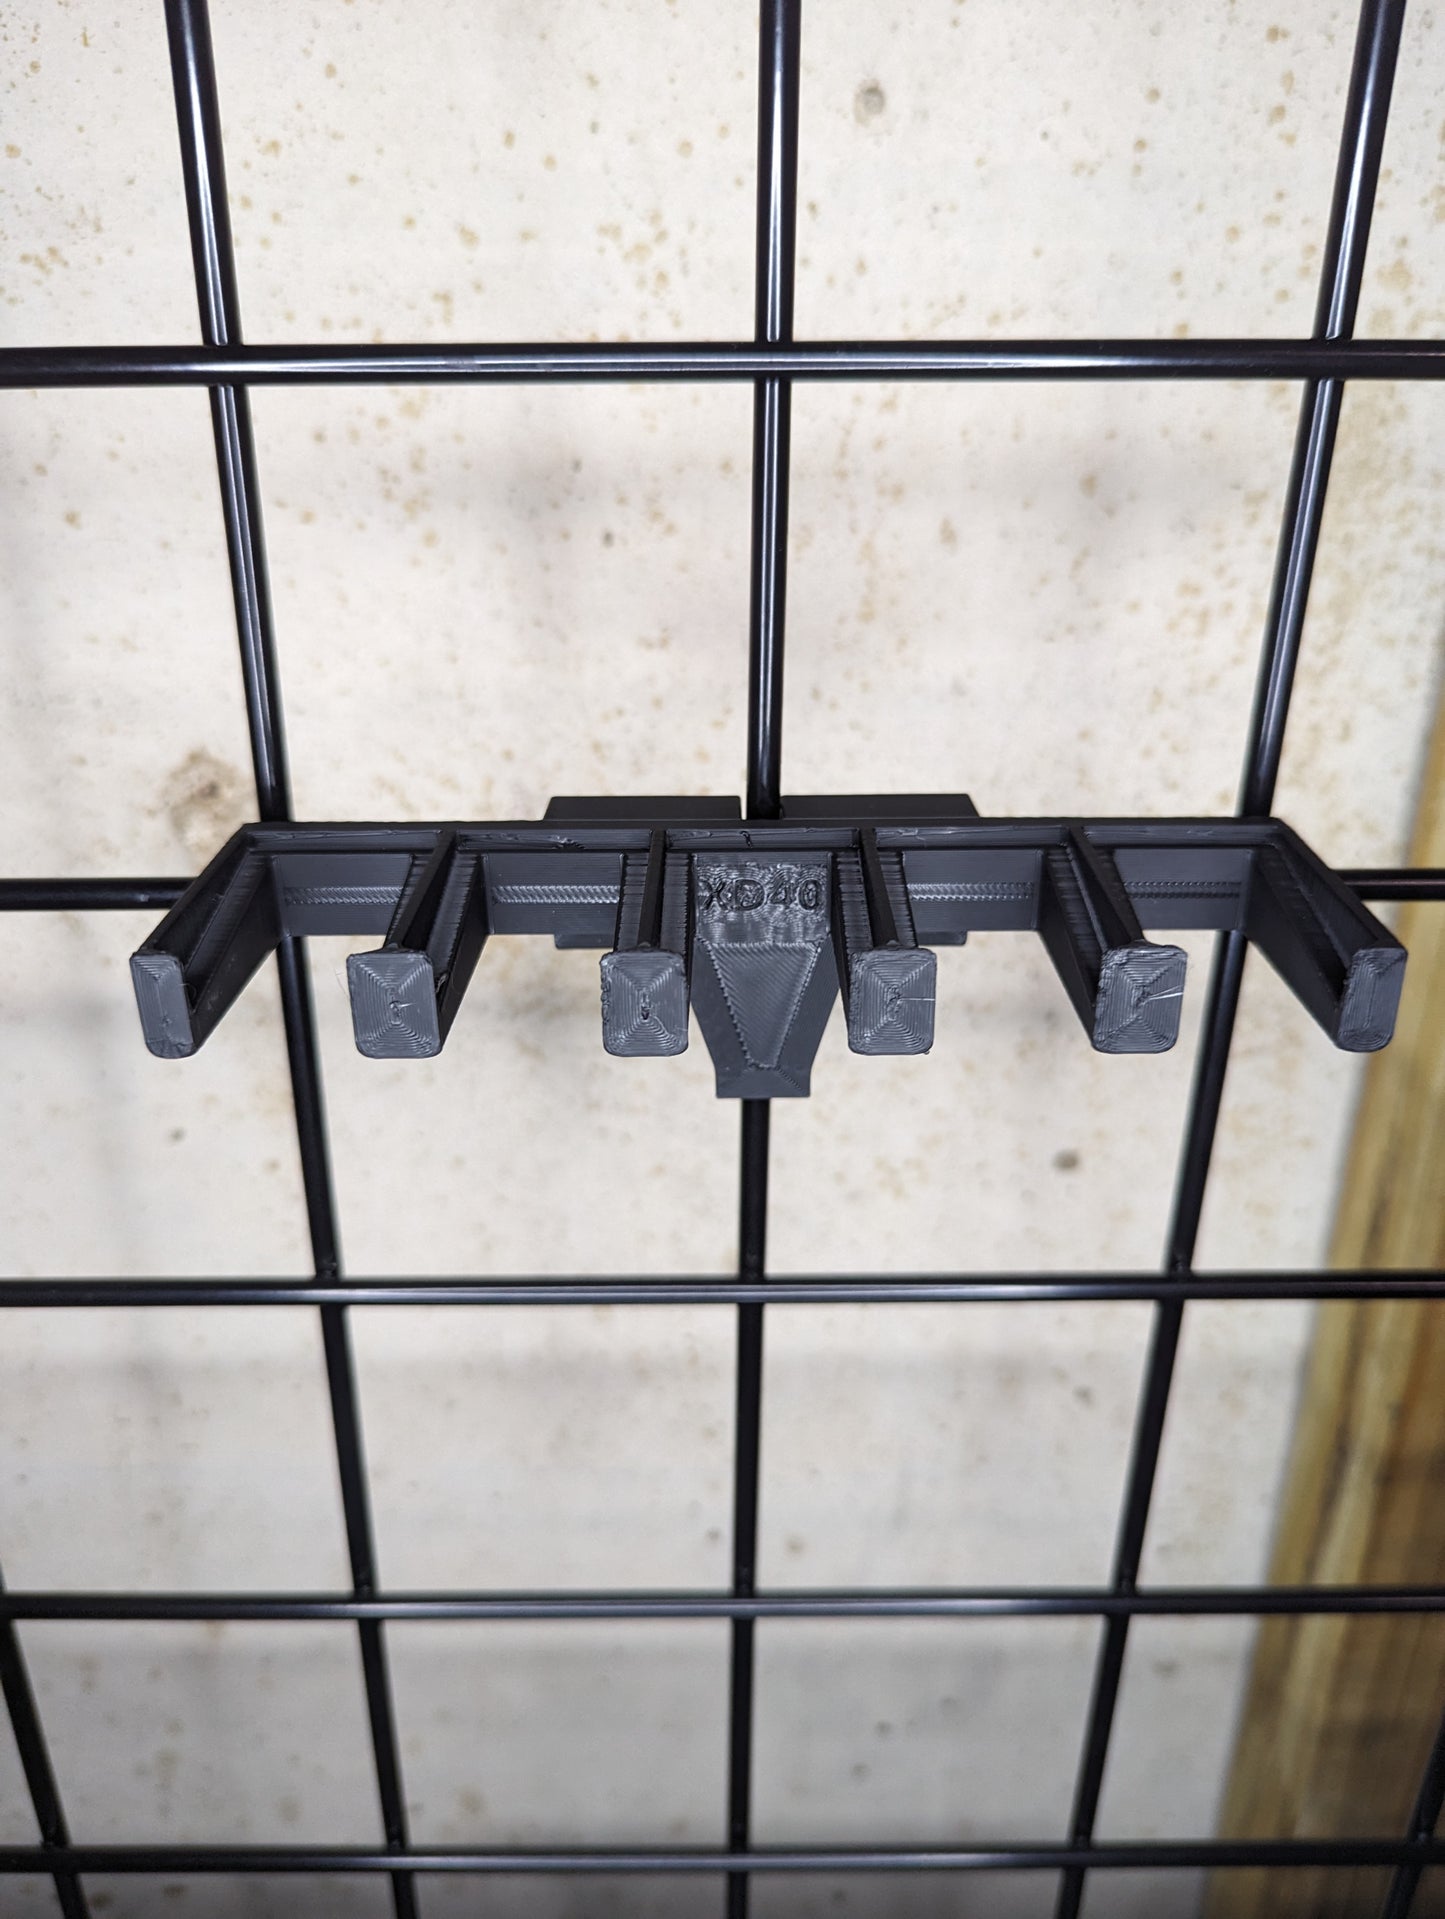 Mount for Springfield XD 40 Mags - Gridwall | Magazine Holder Storage Rack